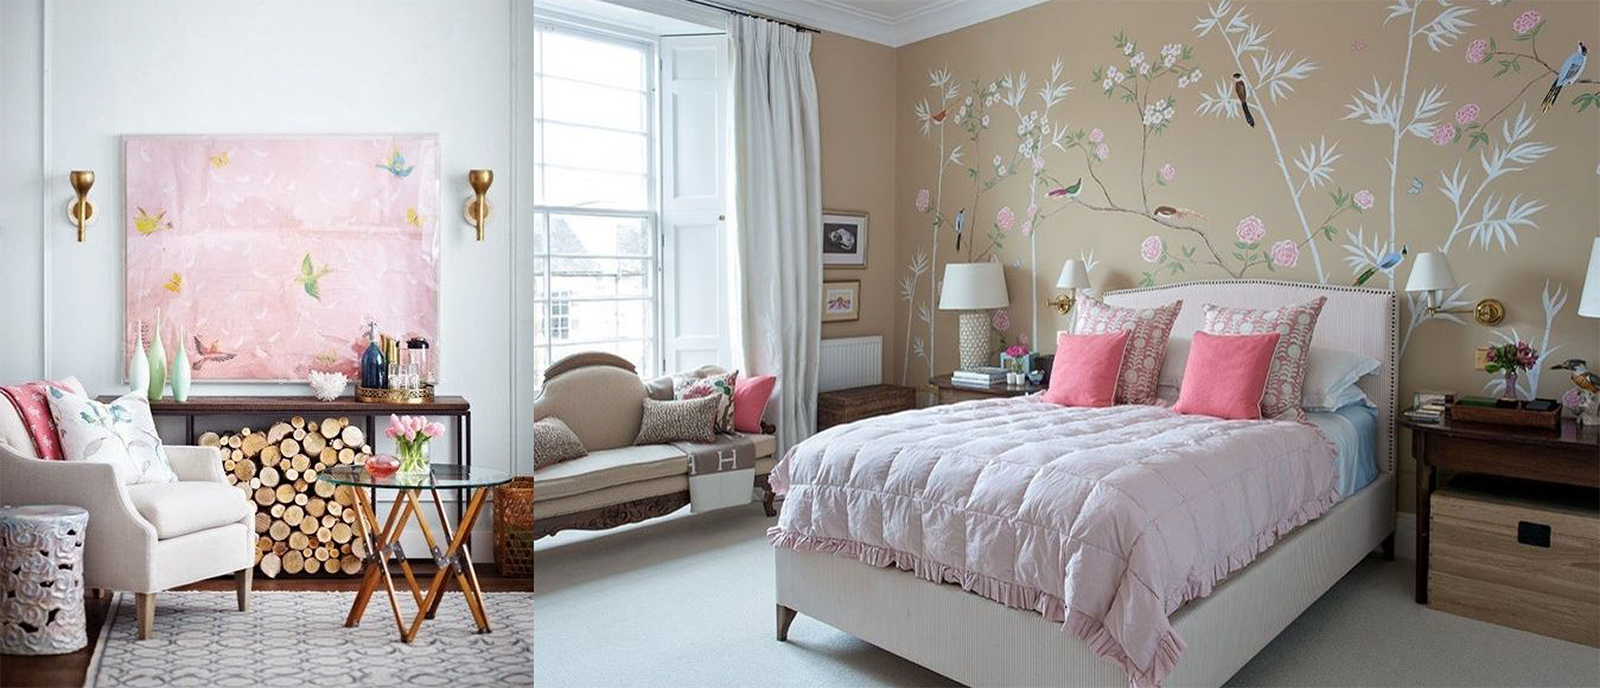  chinoiserie style elegance Images via Houzz Chinoiserie Chic